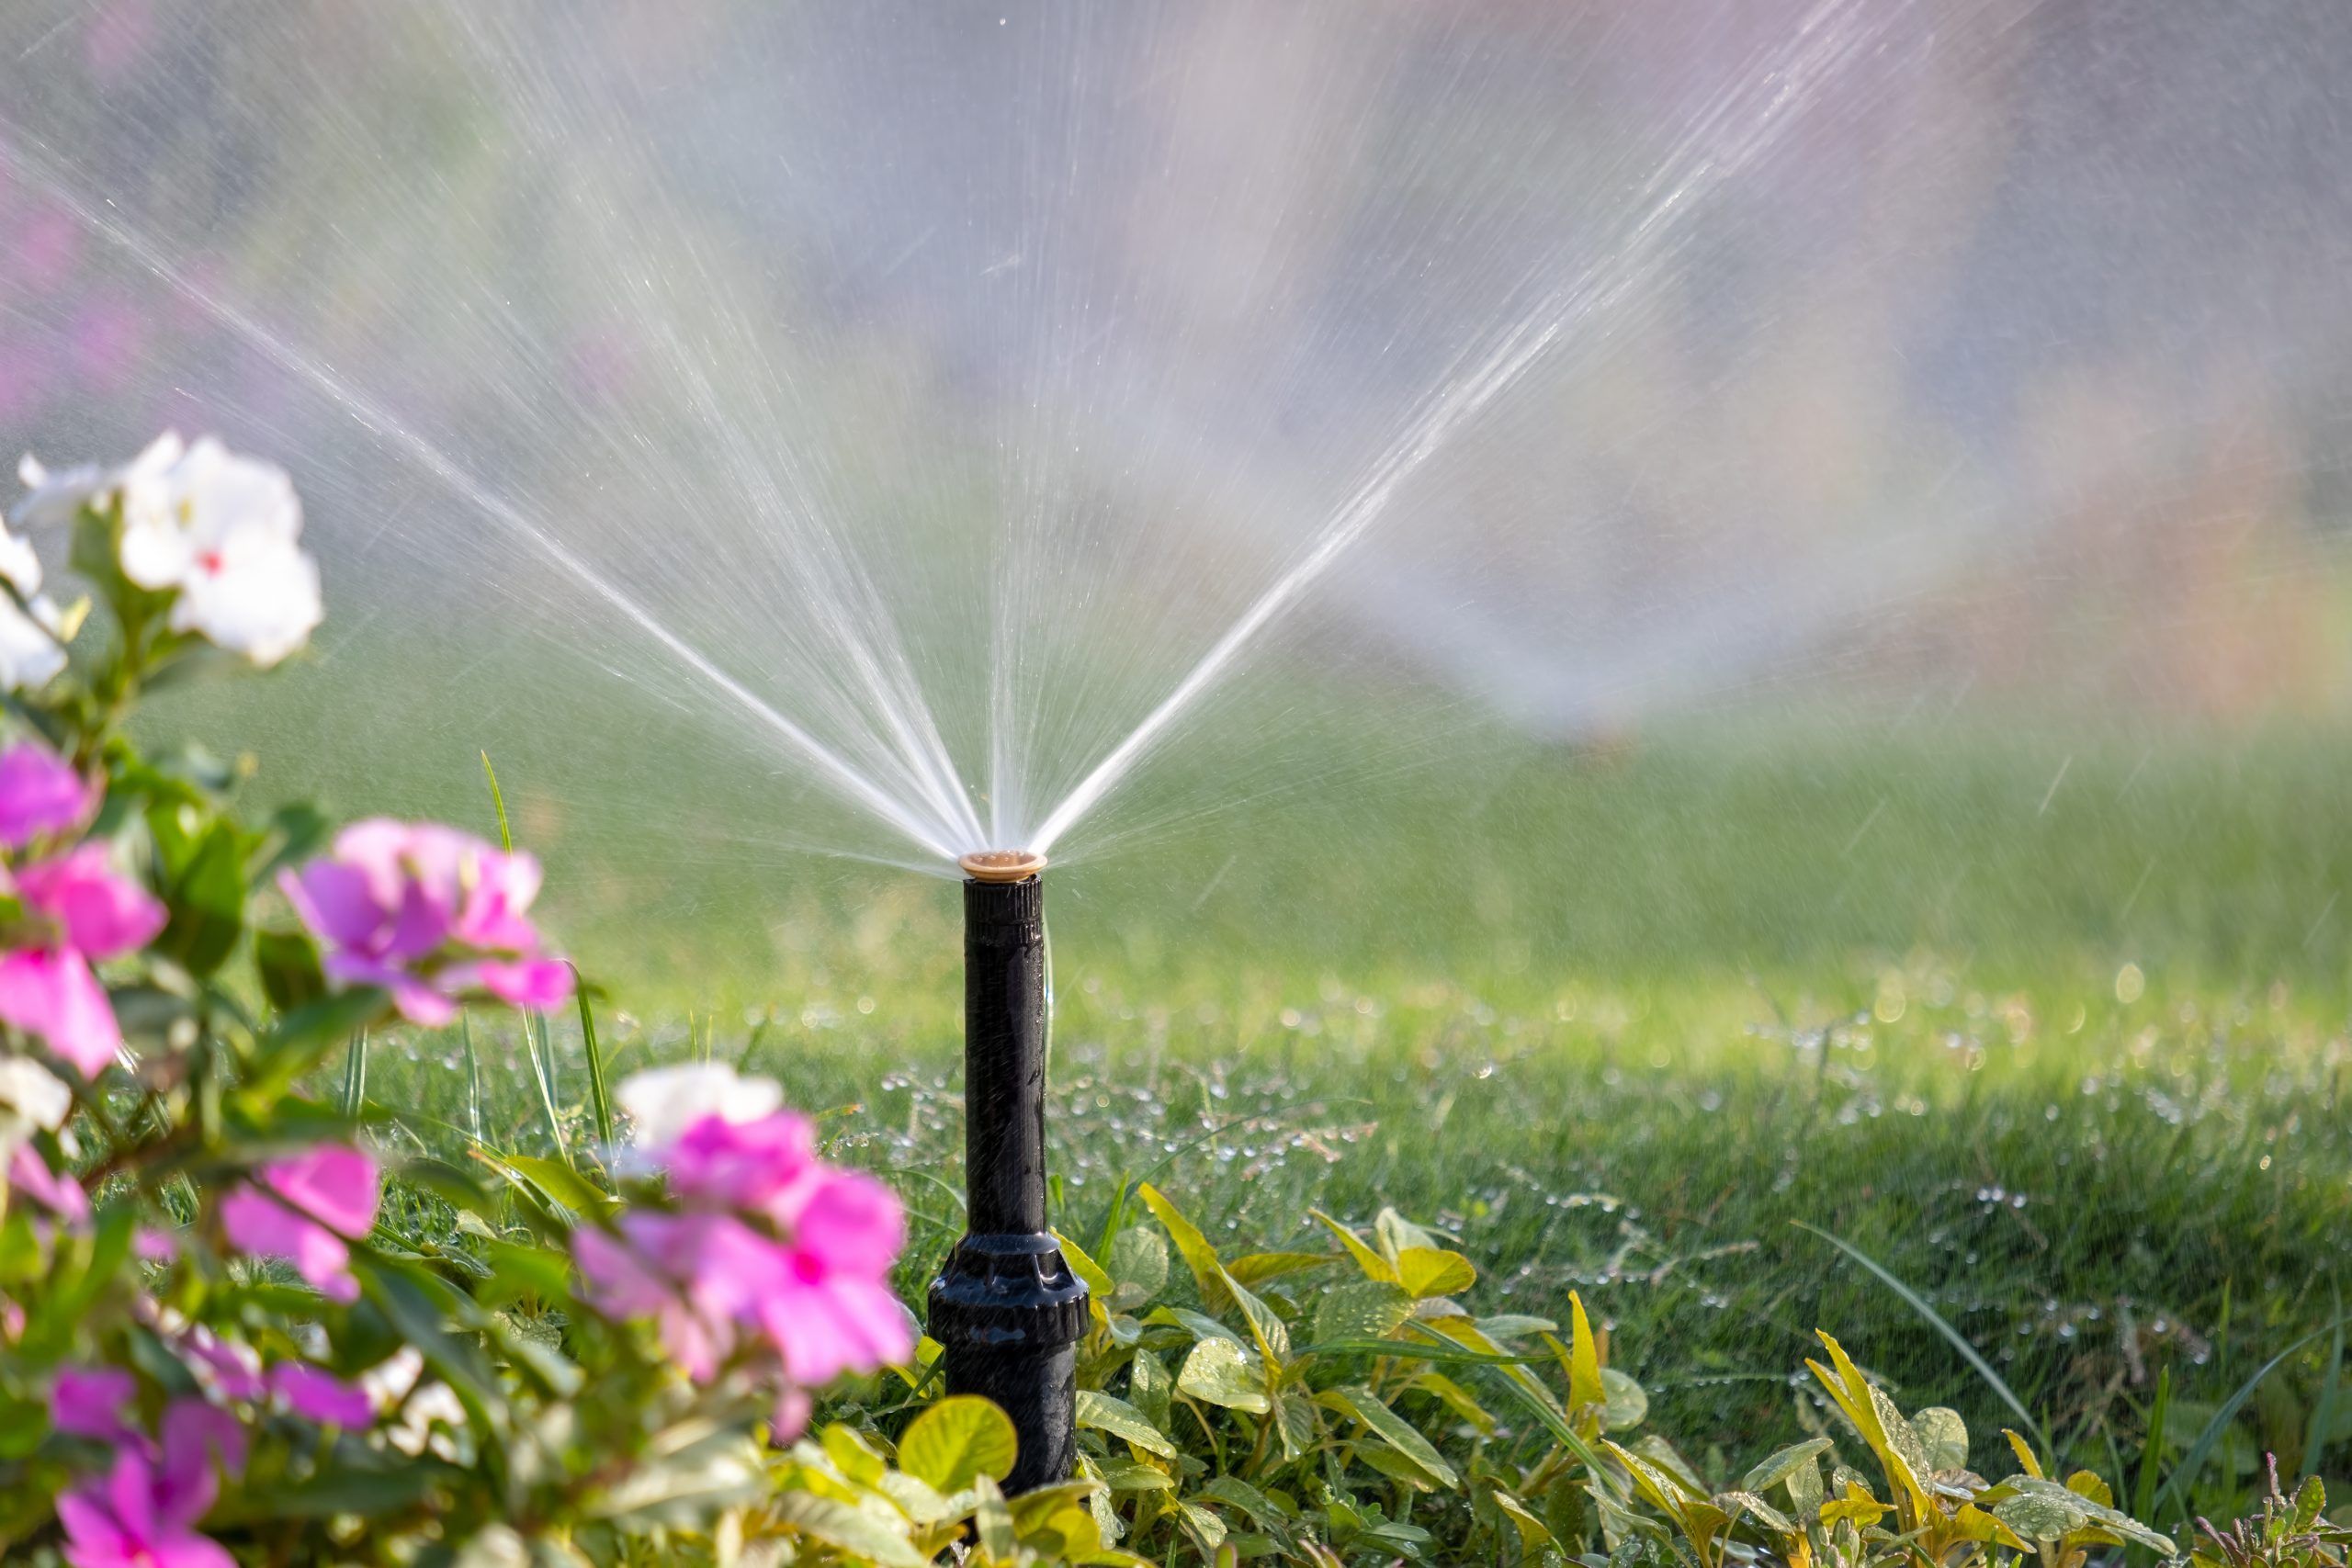 Plastic sprinkler irrigating flower bed on grass lawn with water in summer garden. Watering green vegetation during dry season for maintaining it fresh.